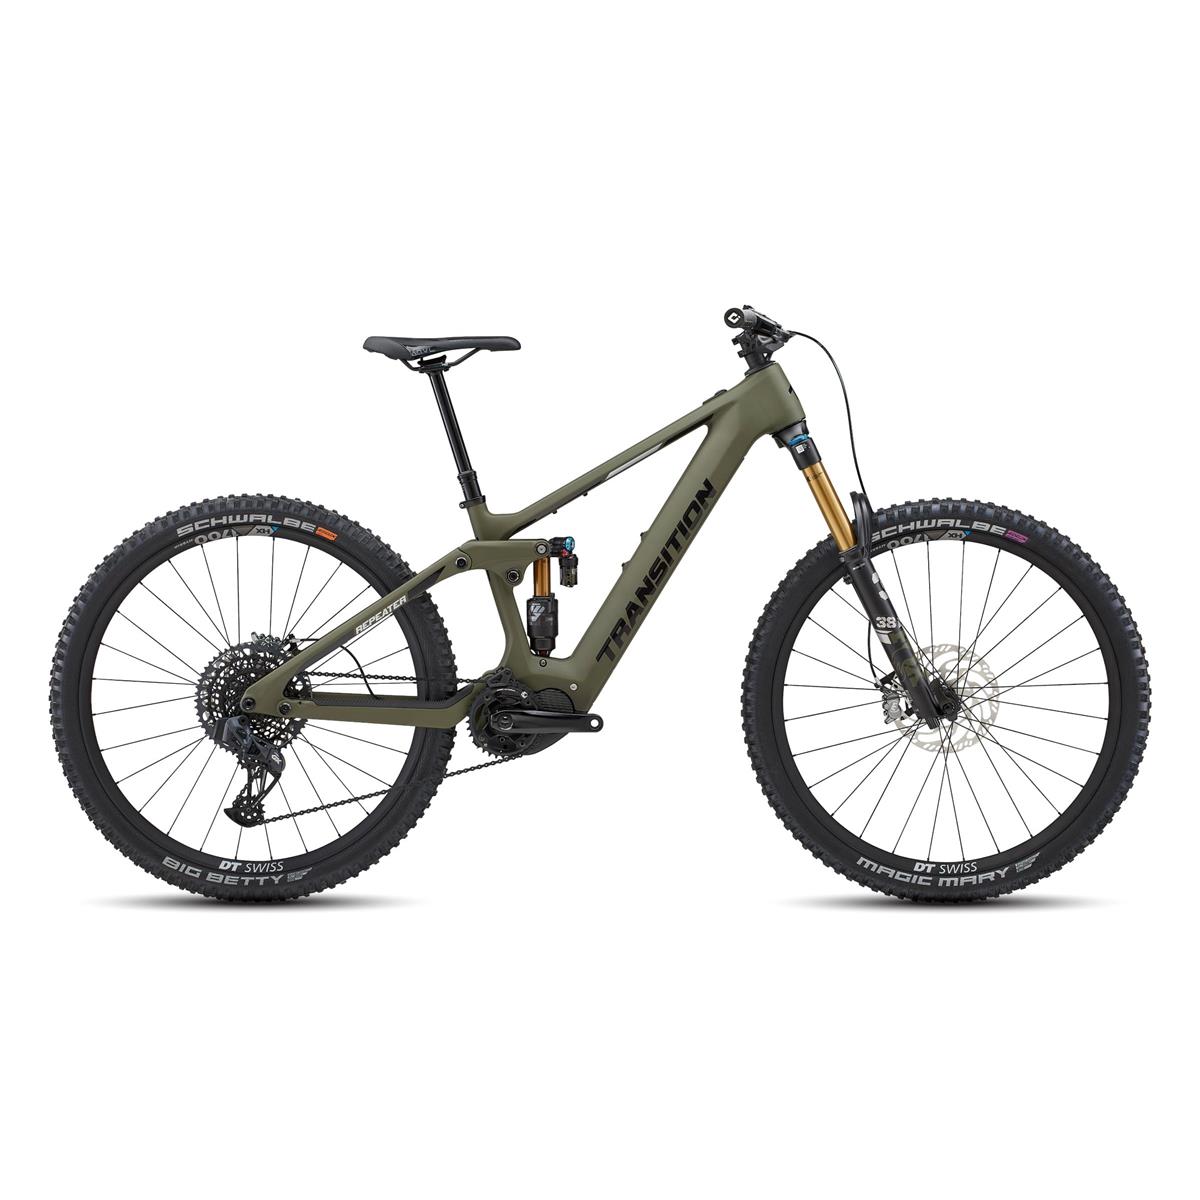 Repeater Carbon AXS 29'' 160mm 12v 630Wh Shimano EP8 Mossy Green Taglia L